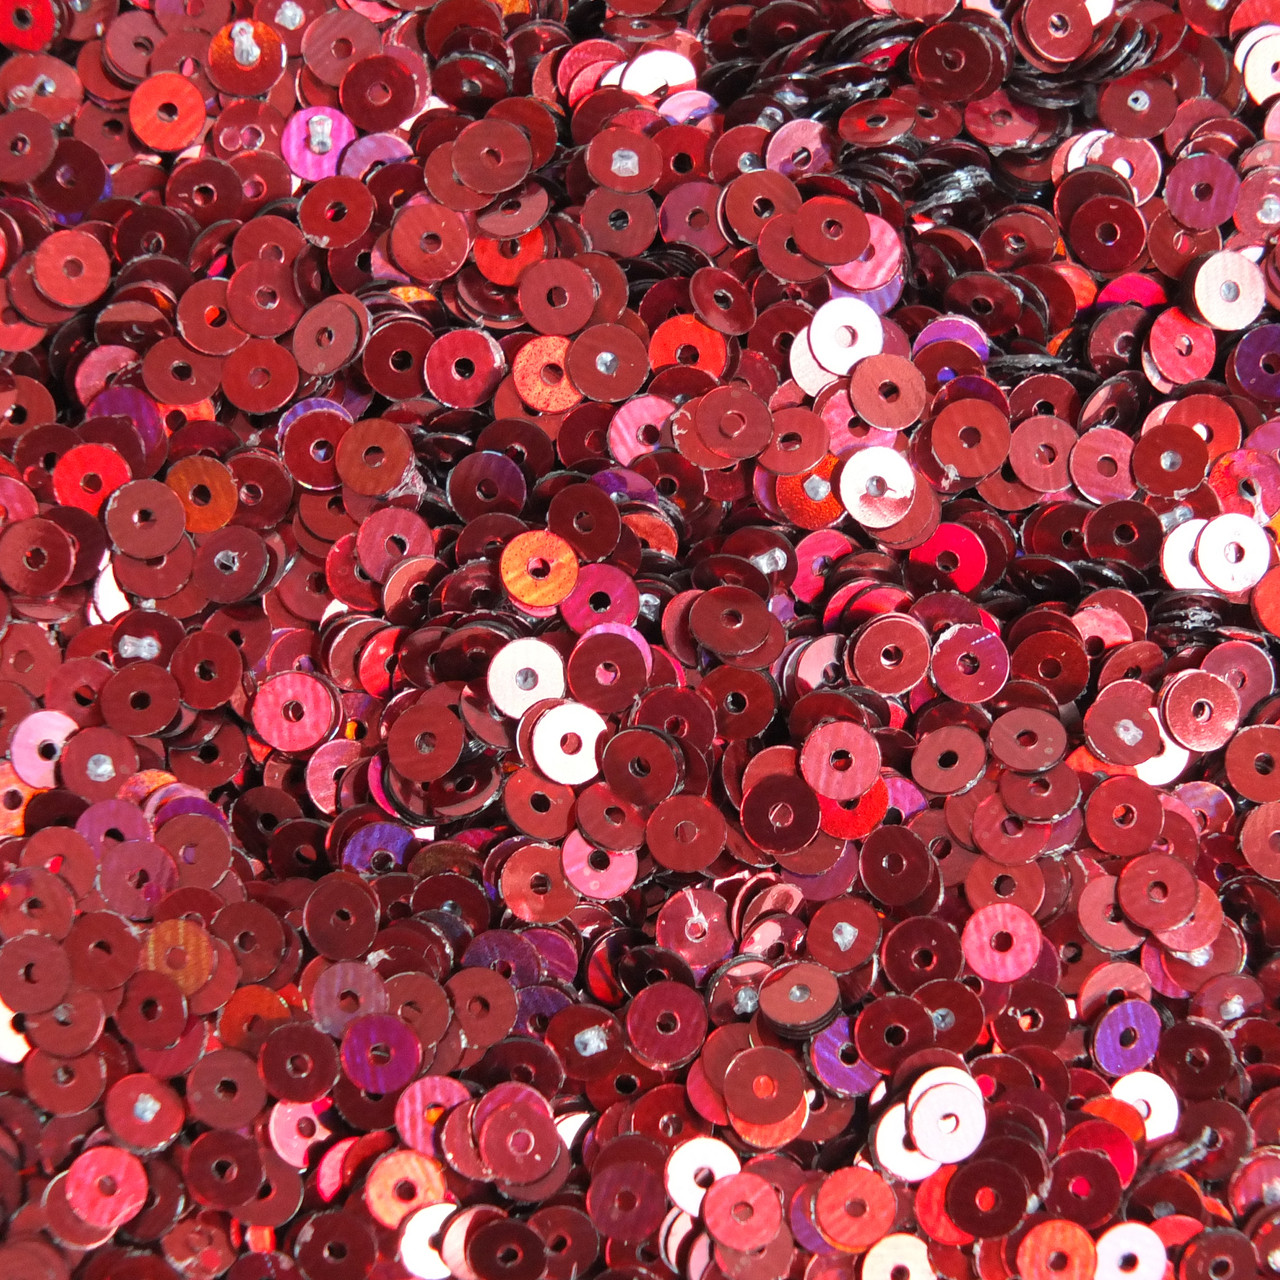 4mm Round Flat Sequins Cranberry Red Lazersheen Rainbow Reflective Metallic. Made in USA